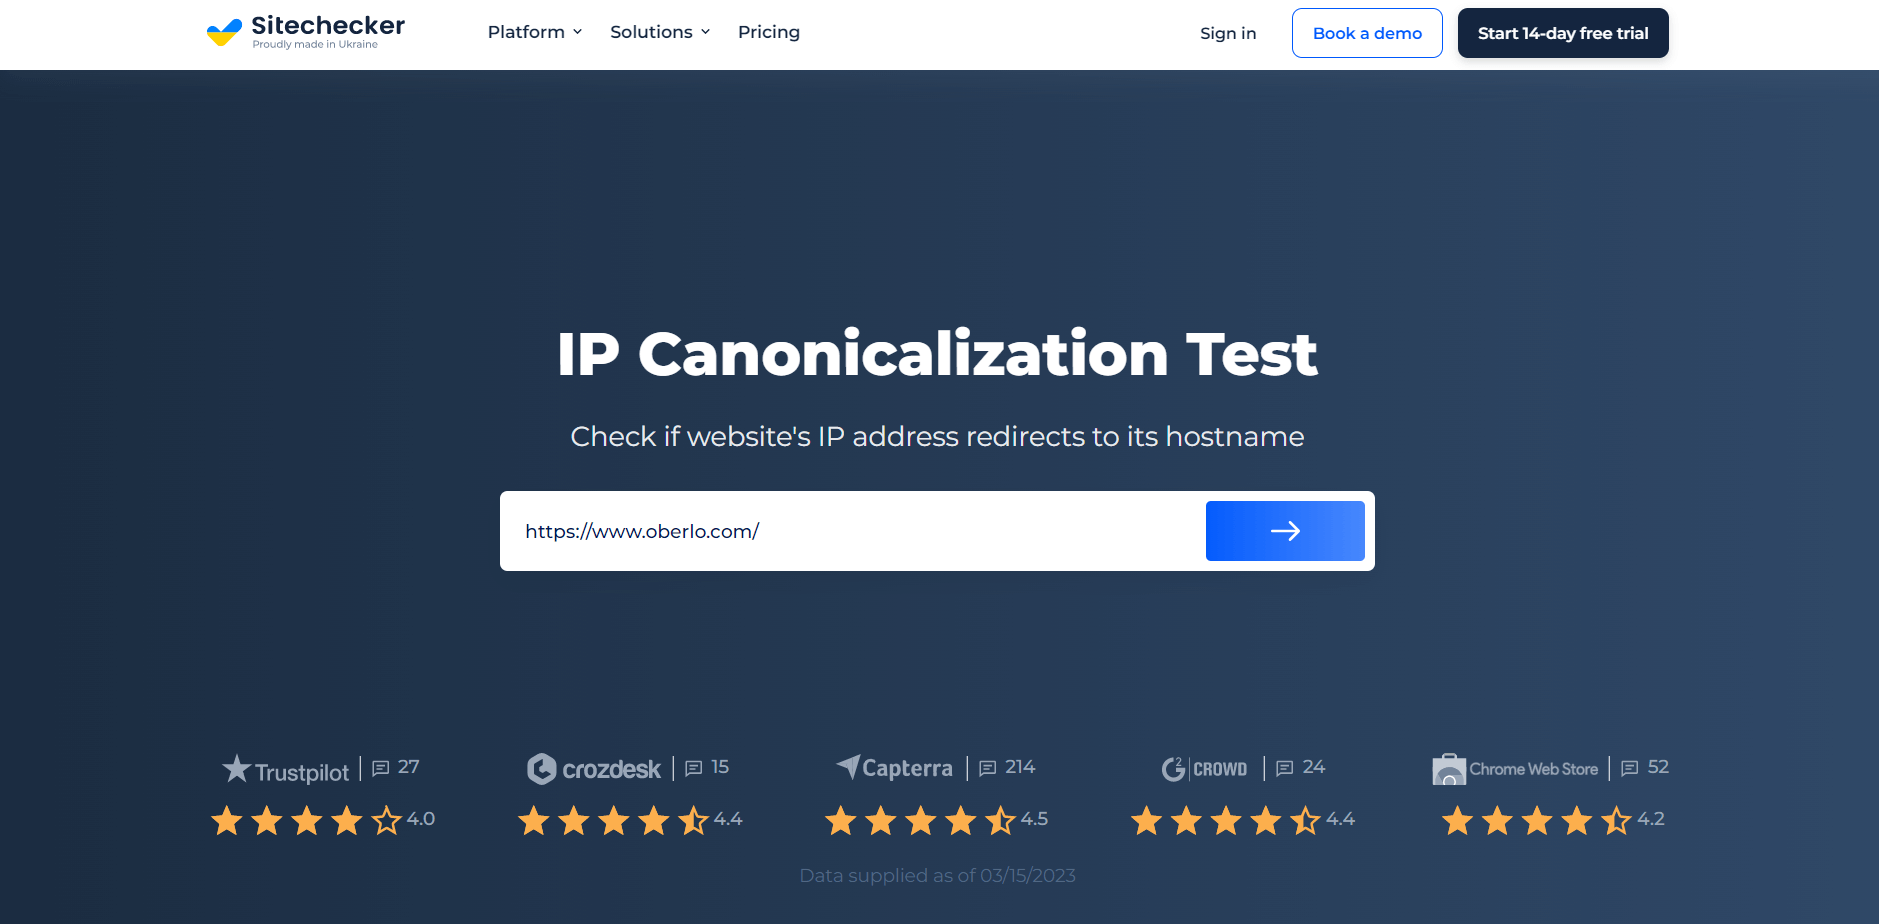 The IP canonicalization test page with an example IP address